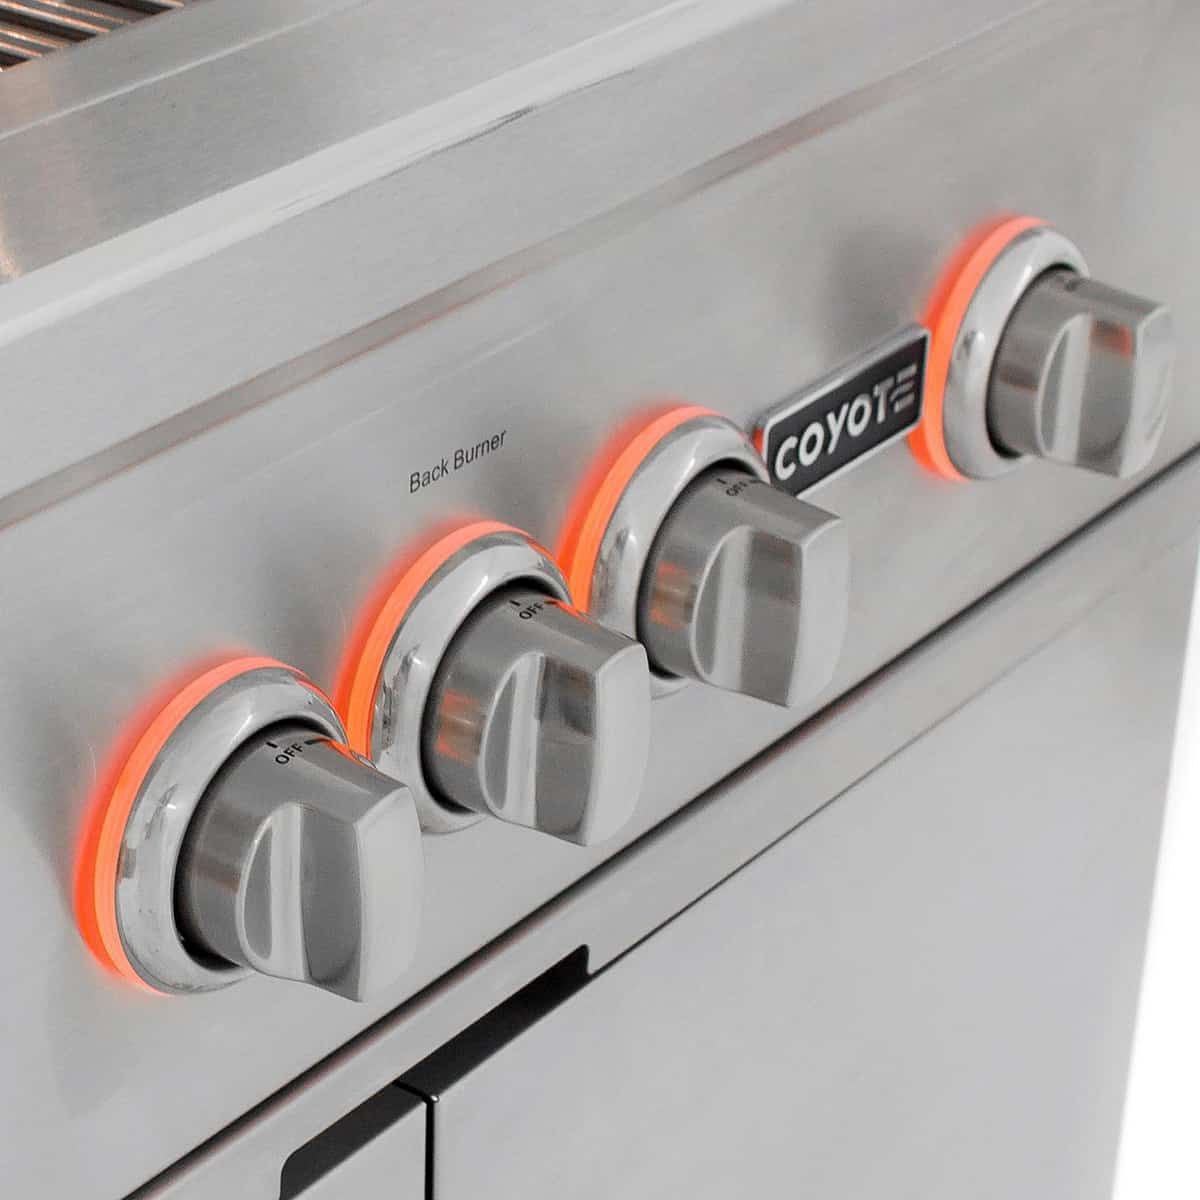 Coyote S-Series 36 Inch Built-In 4-Burner Grill with Rapid sear Infrared Burner Knobs Close-up